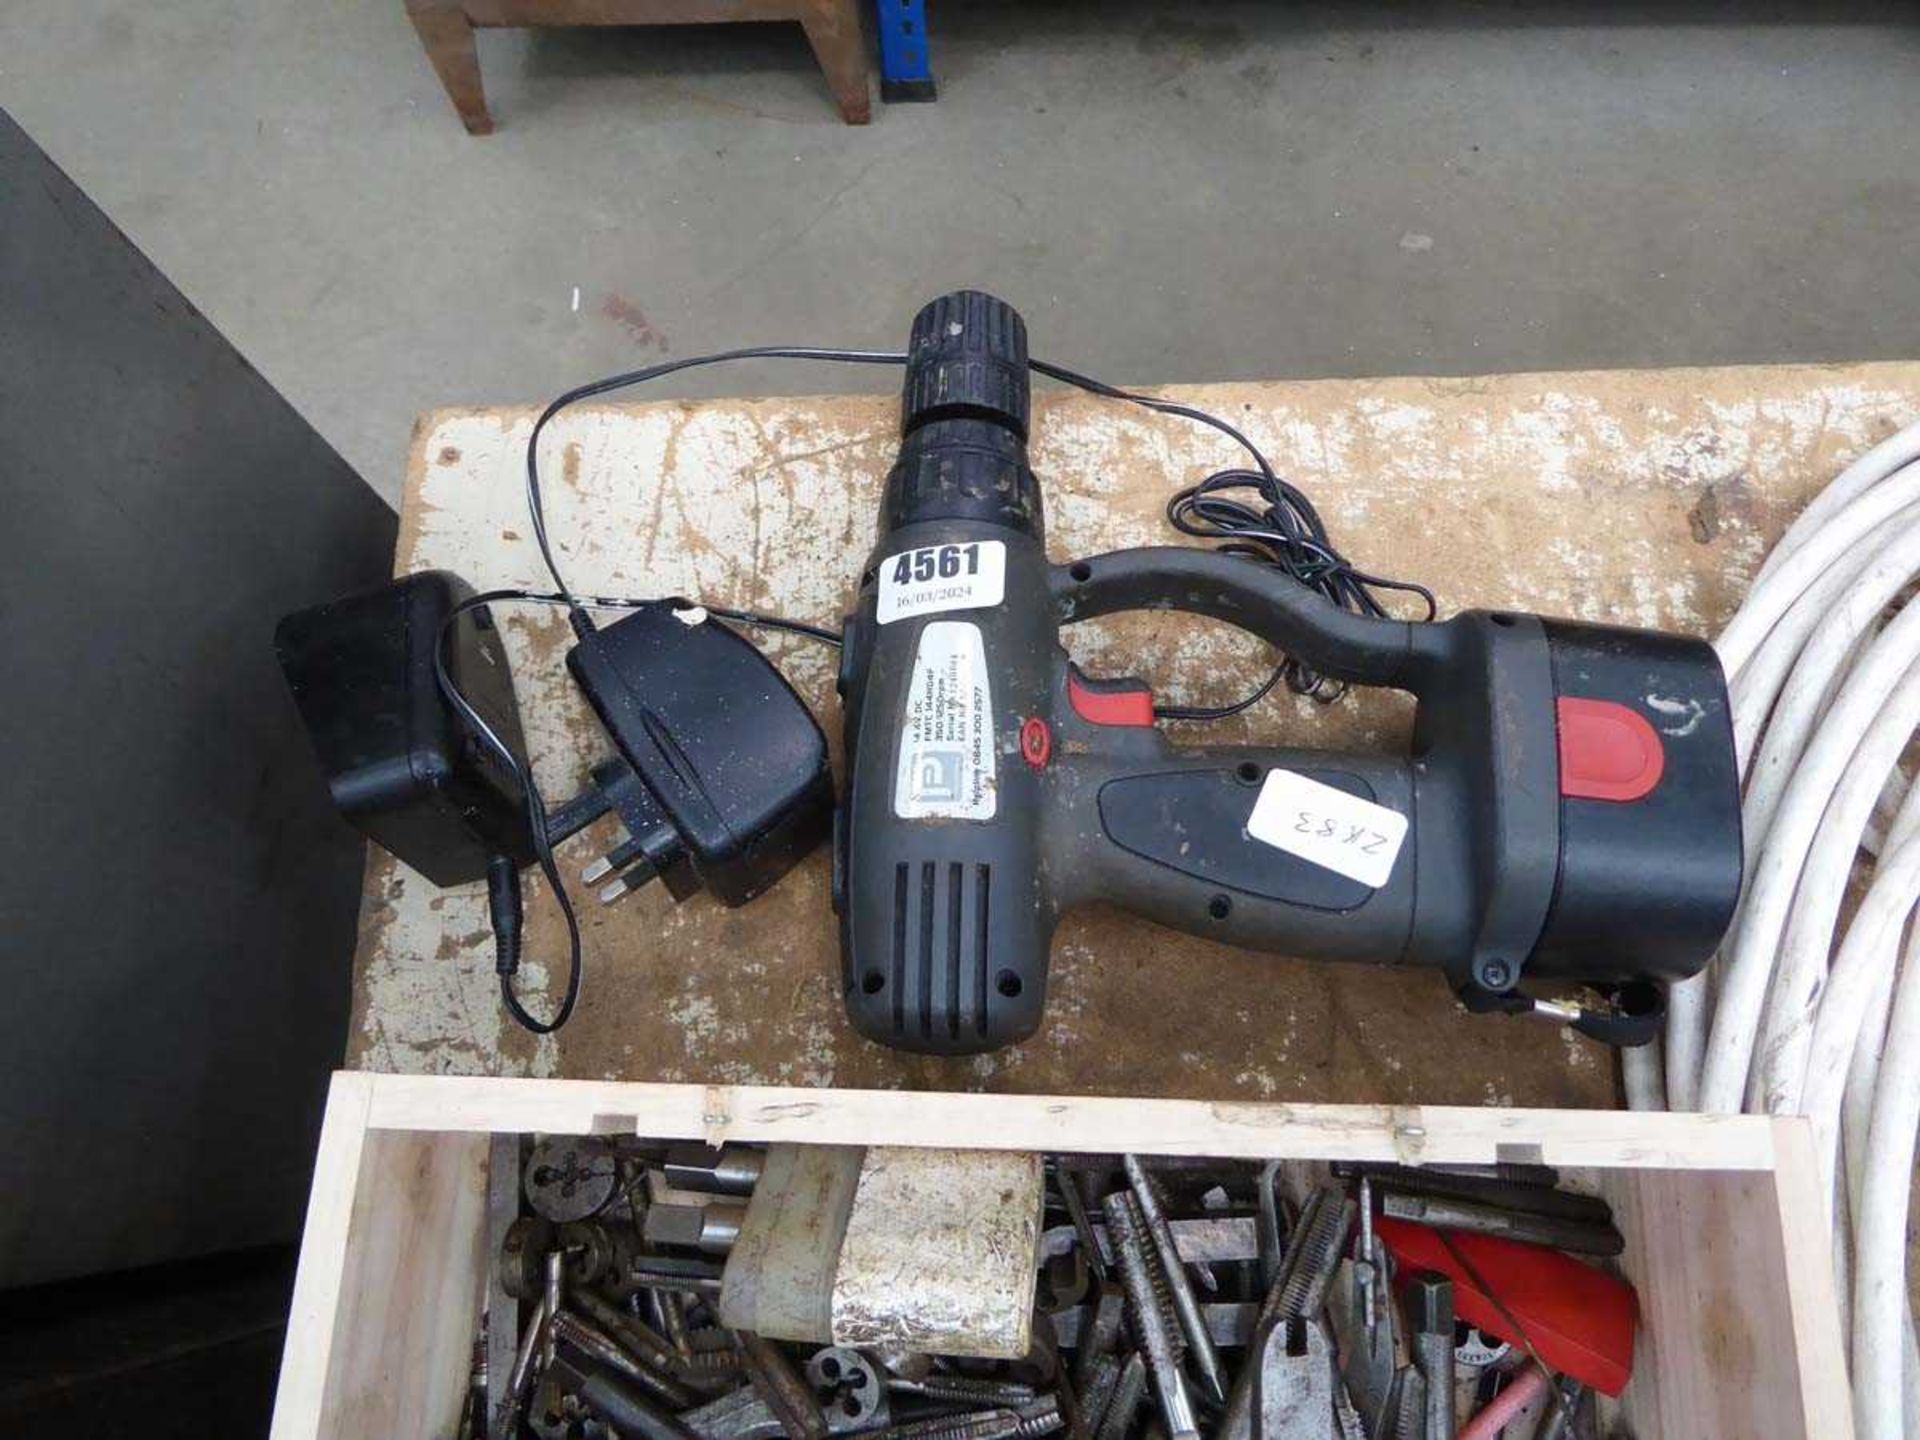 Power Performance battery drill with one battery and charger